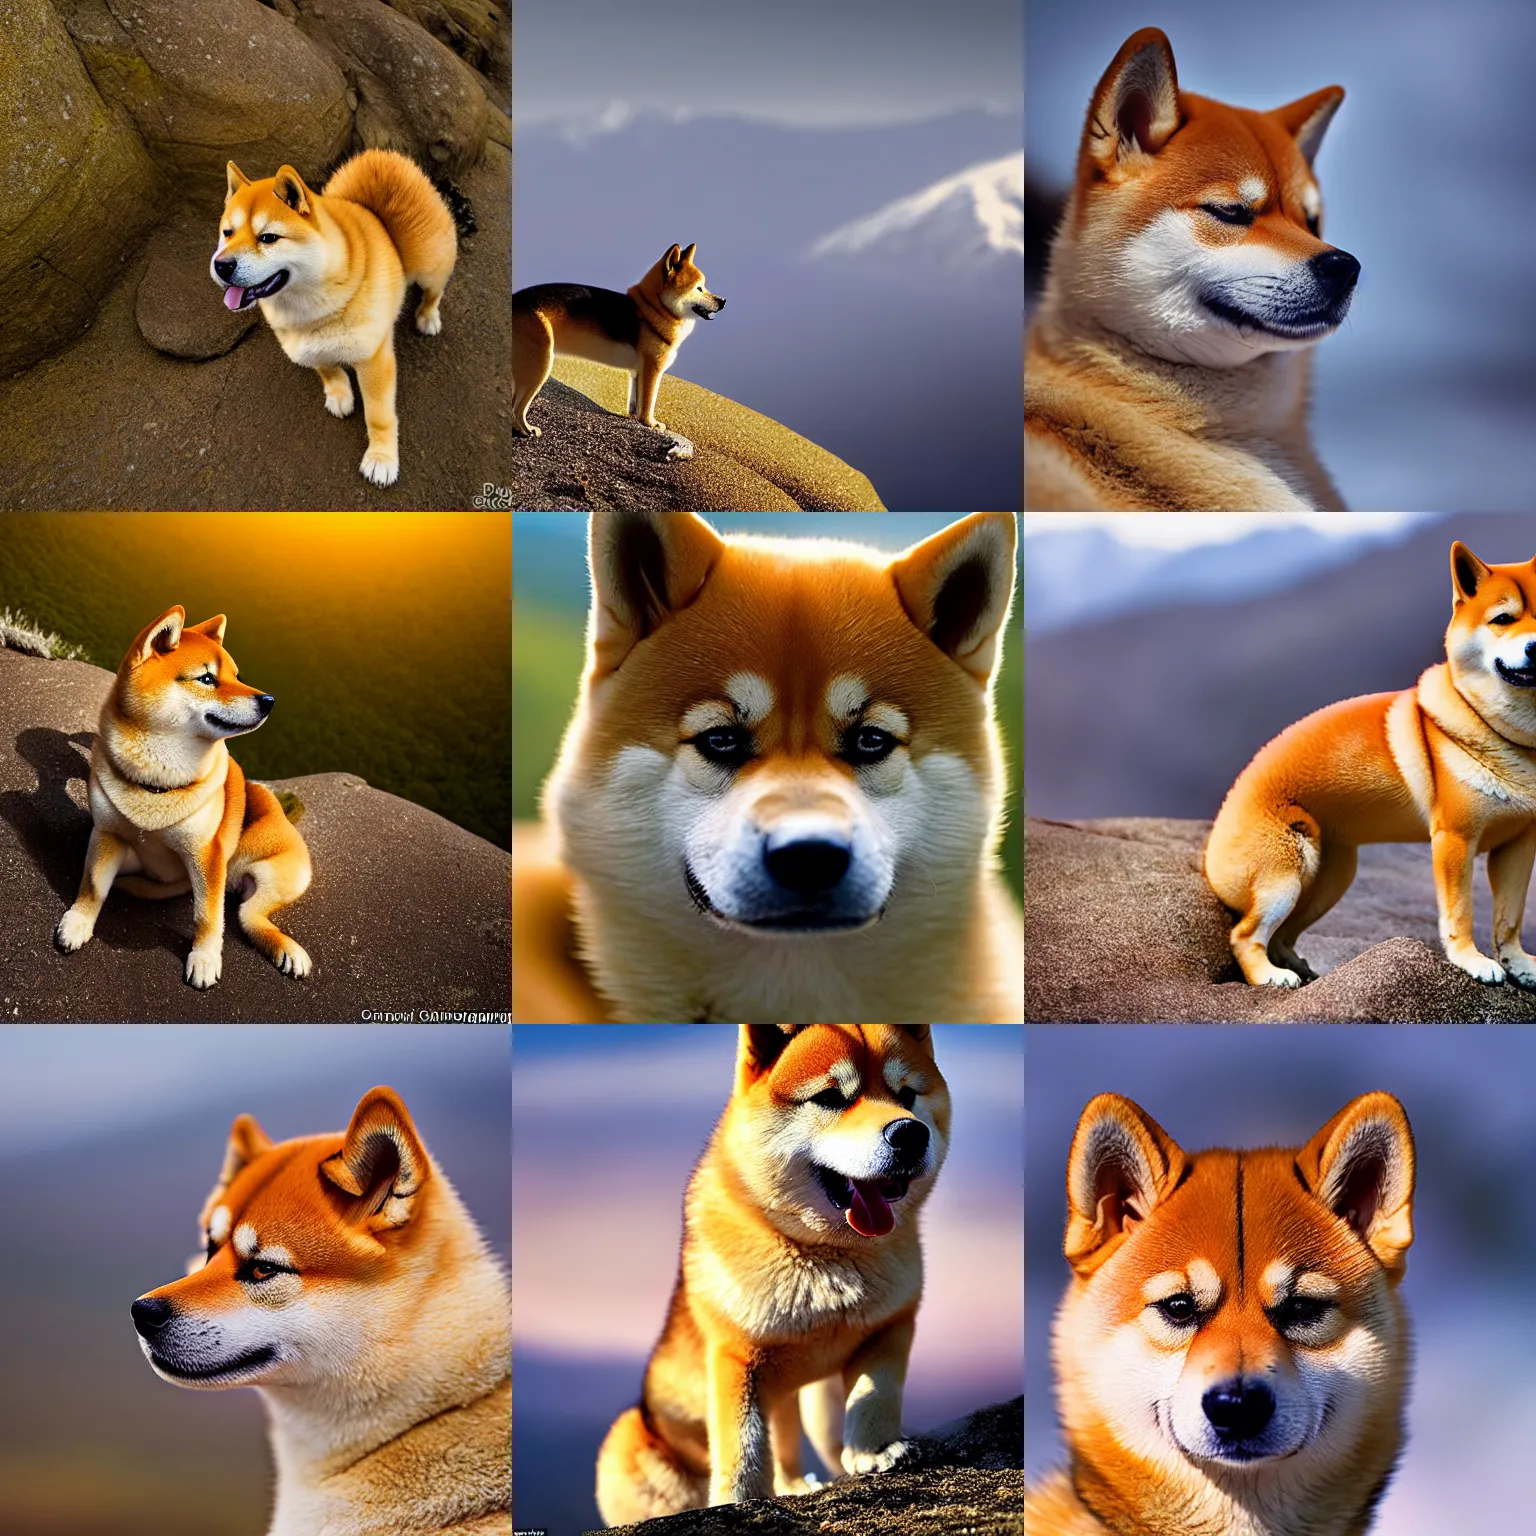 Prompt: award winning wildlife closeup photography of a shiba inu on a mountain, wildlife photography by Paul Nicklen, perfect lighting, national geographic, BBC documentary, professional, high quality camera, lots of detail, crisp lighting